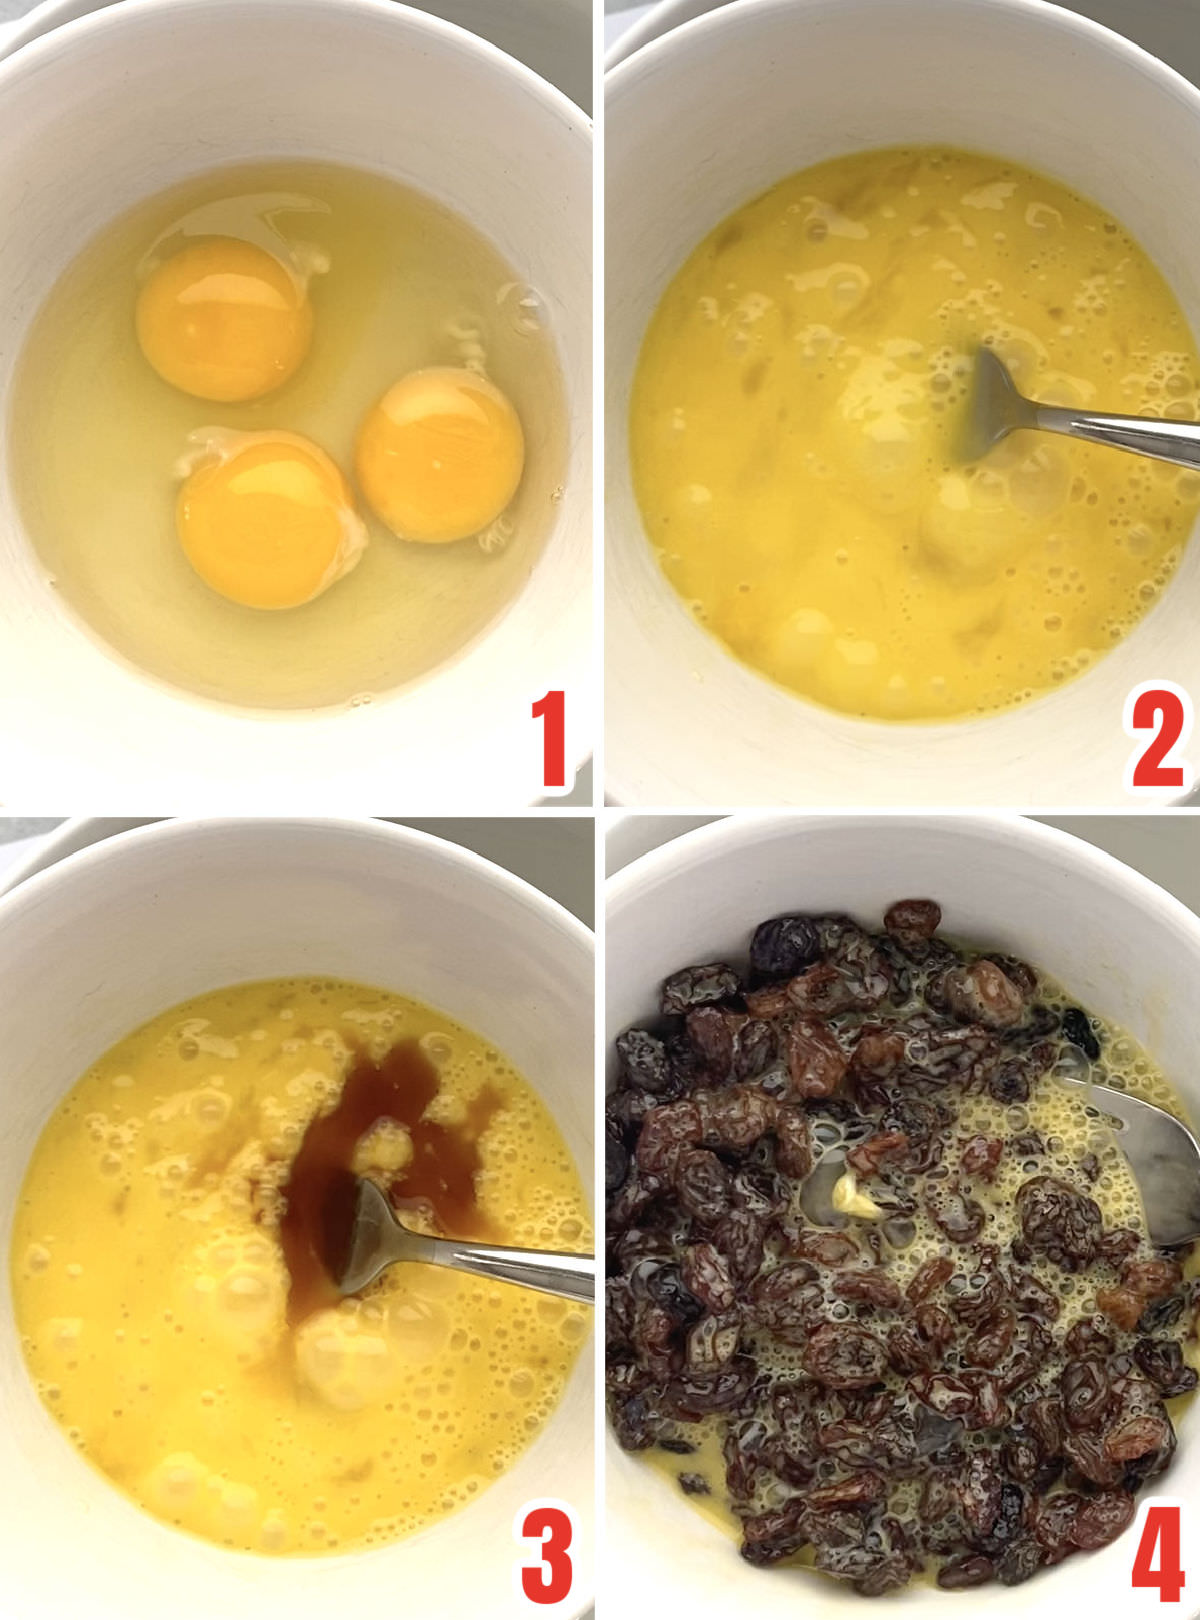 Collage image showing how to prepare the raisins to soak in the egg and vanilla mixture.